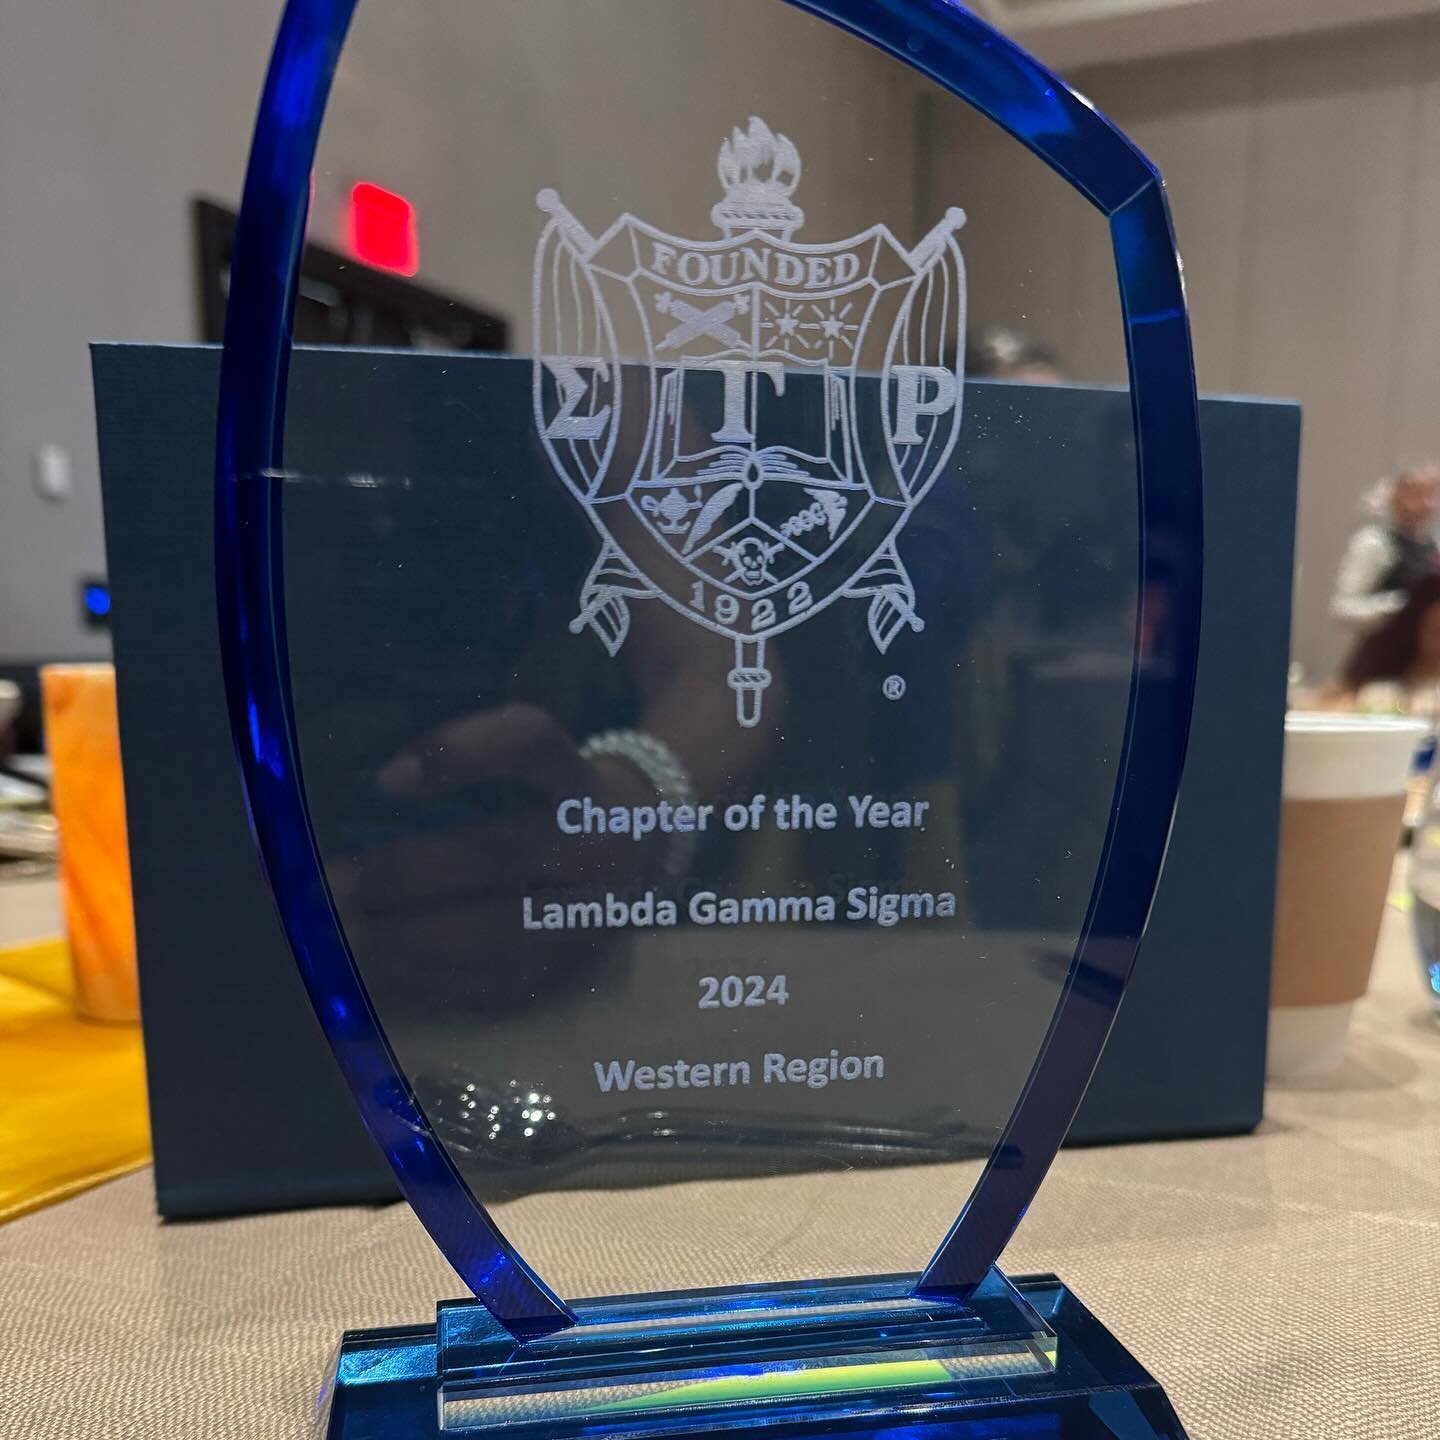 Is that 4 years in a row for The LEGENDARY Lambda Gamma Sigma Alumnae Chapter of Sigma Gamma Rho Sorority, Inc. to win Western Region Chapter of the Year?! 👀 We had such a great weekend at the 72nd Western Region Conference!! We enjoyed bonding with